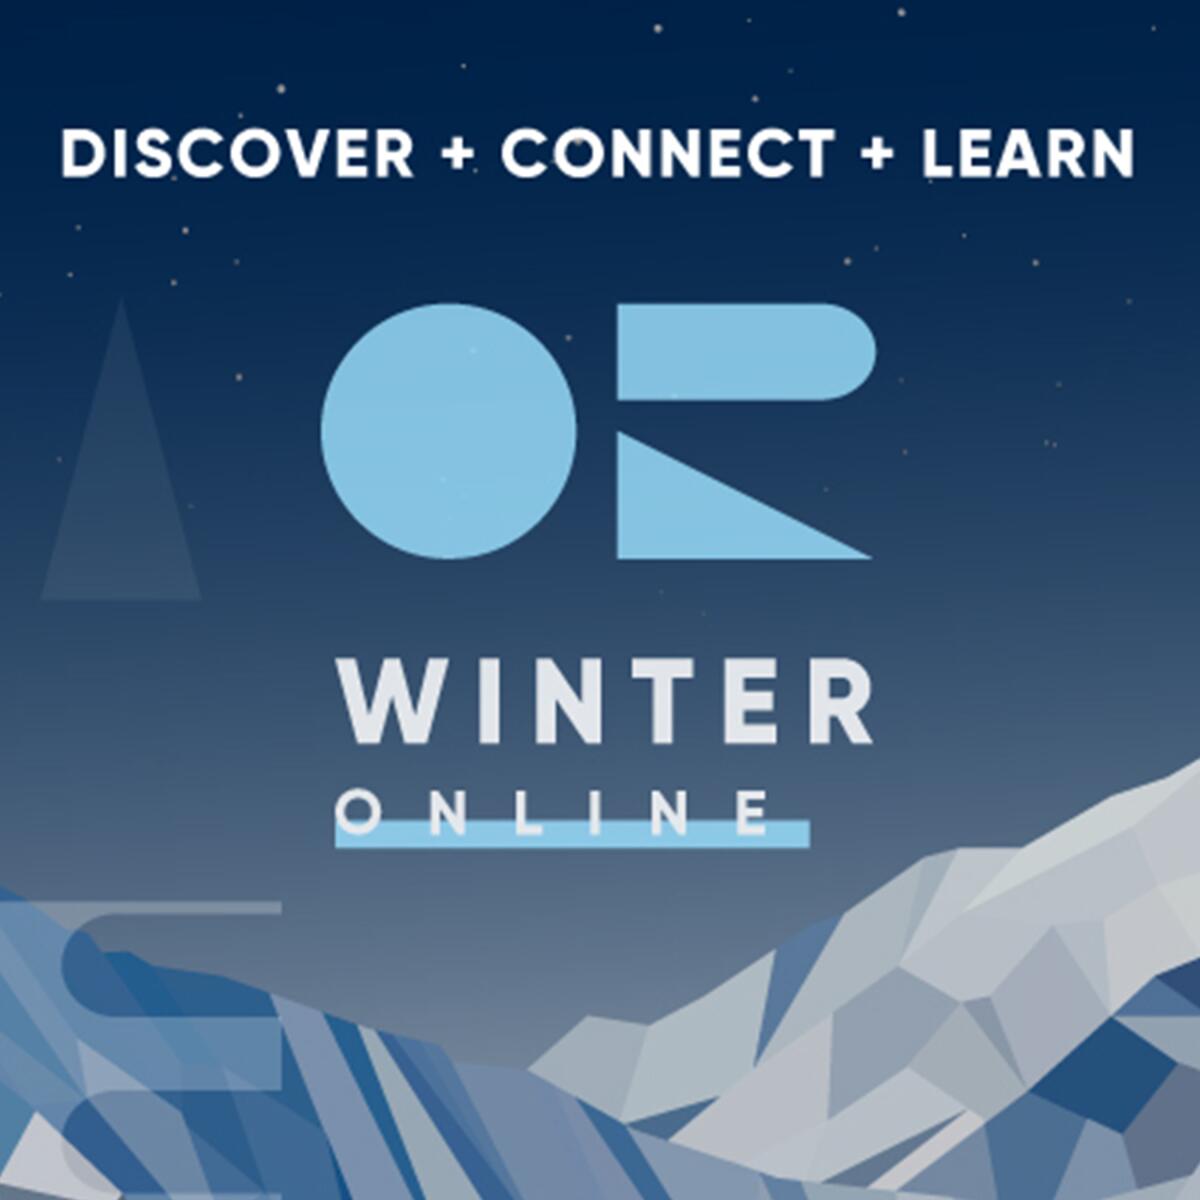 A promotion shows an illustration of mountains and reads "Discover + Connect + Learn" and "Winter Online."